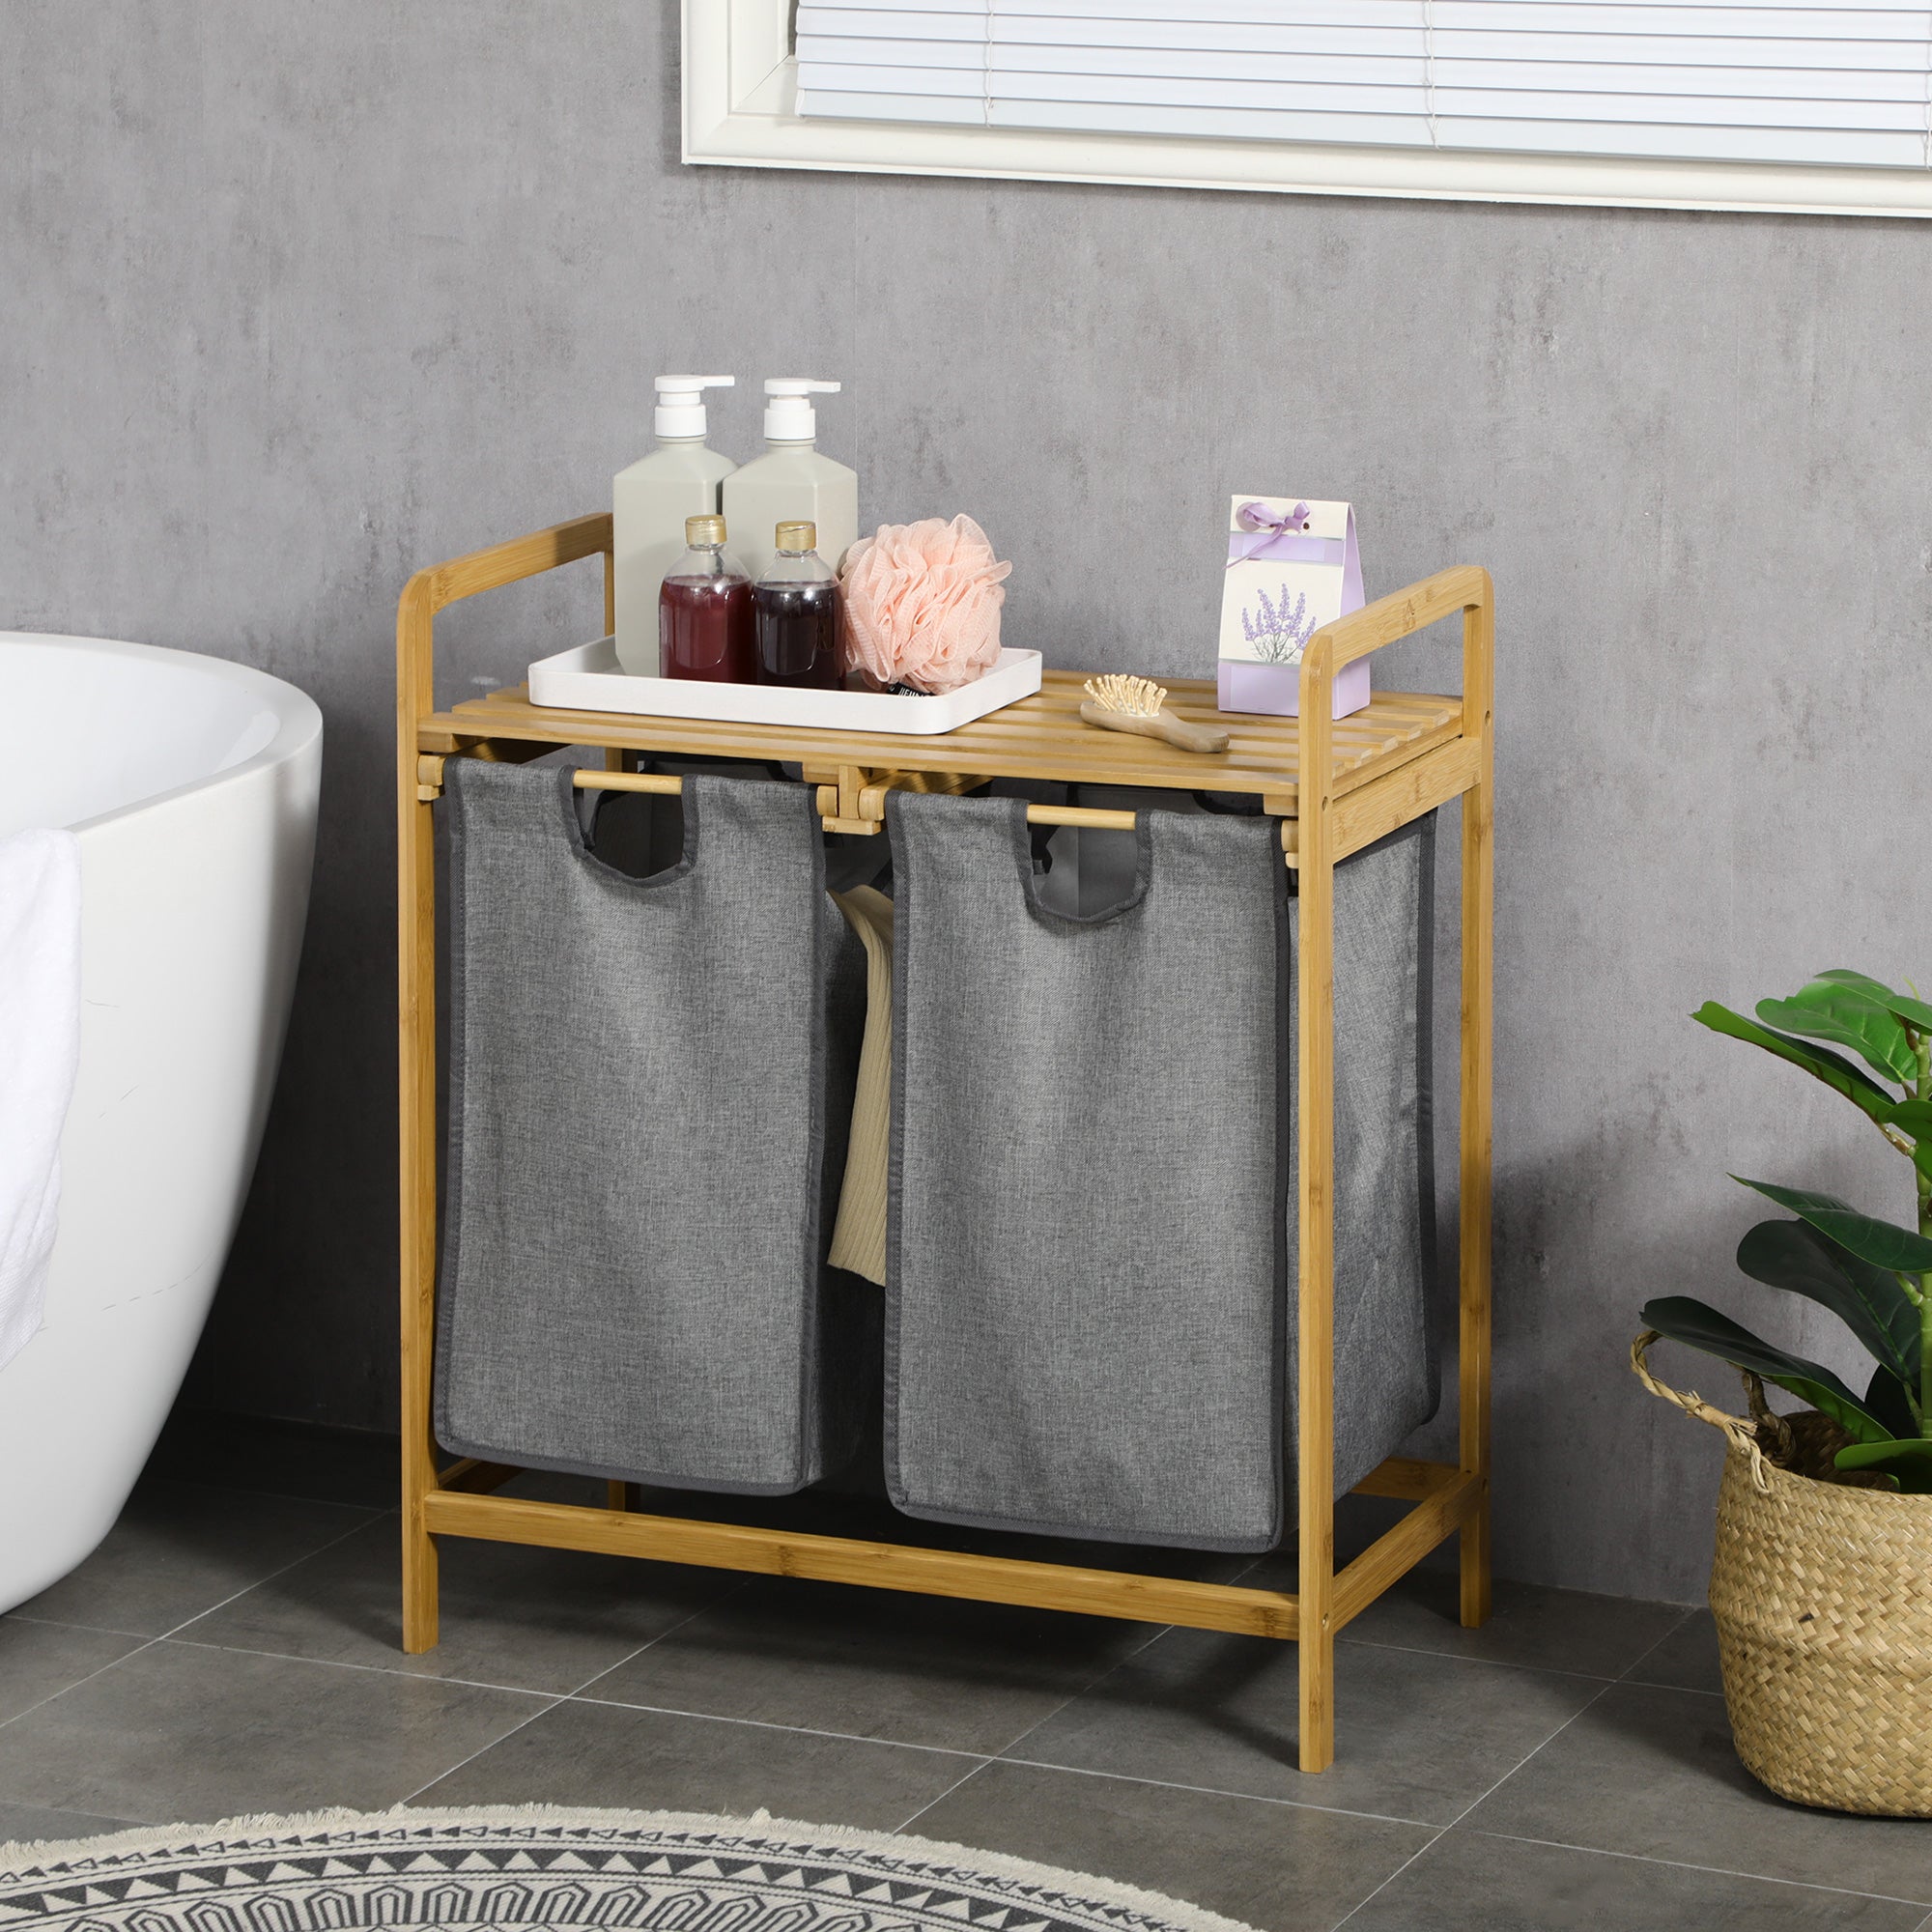 Bamboo Laundry Basket, Laundry Hamper with Shelf, Pull-out Bags for Bedroom, Bathroom, Laundry Room, 64 x 33 x 73 cm, Grey-1